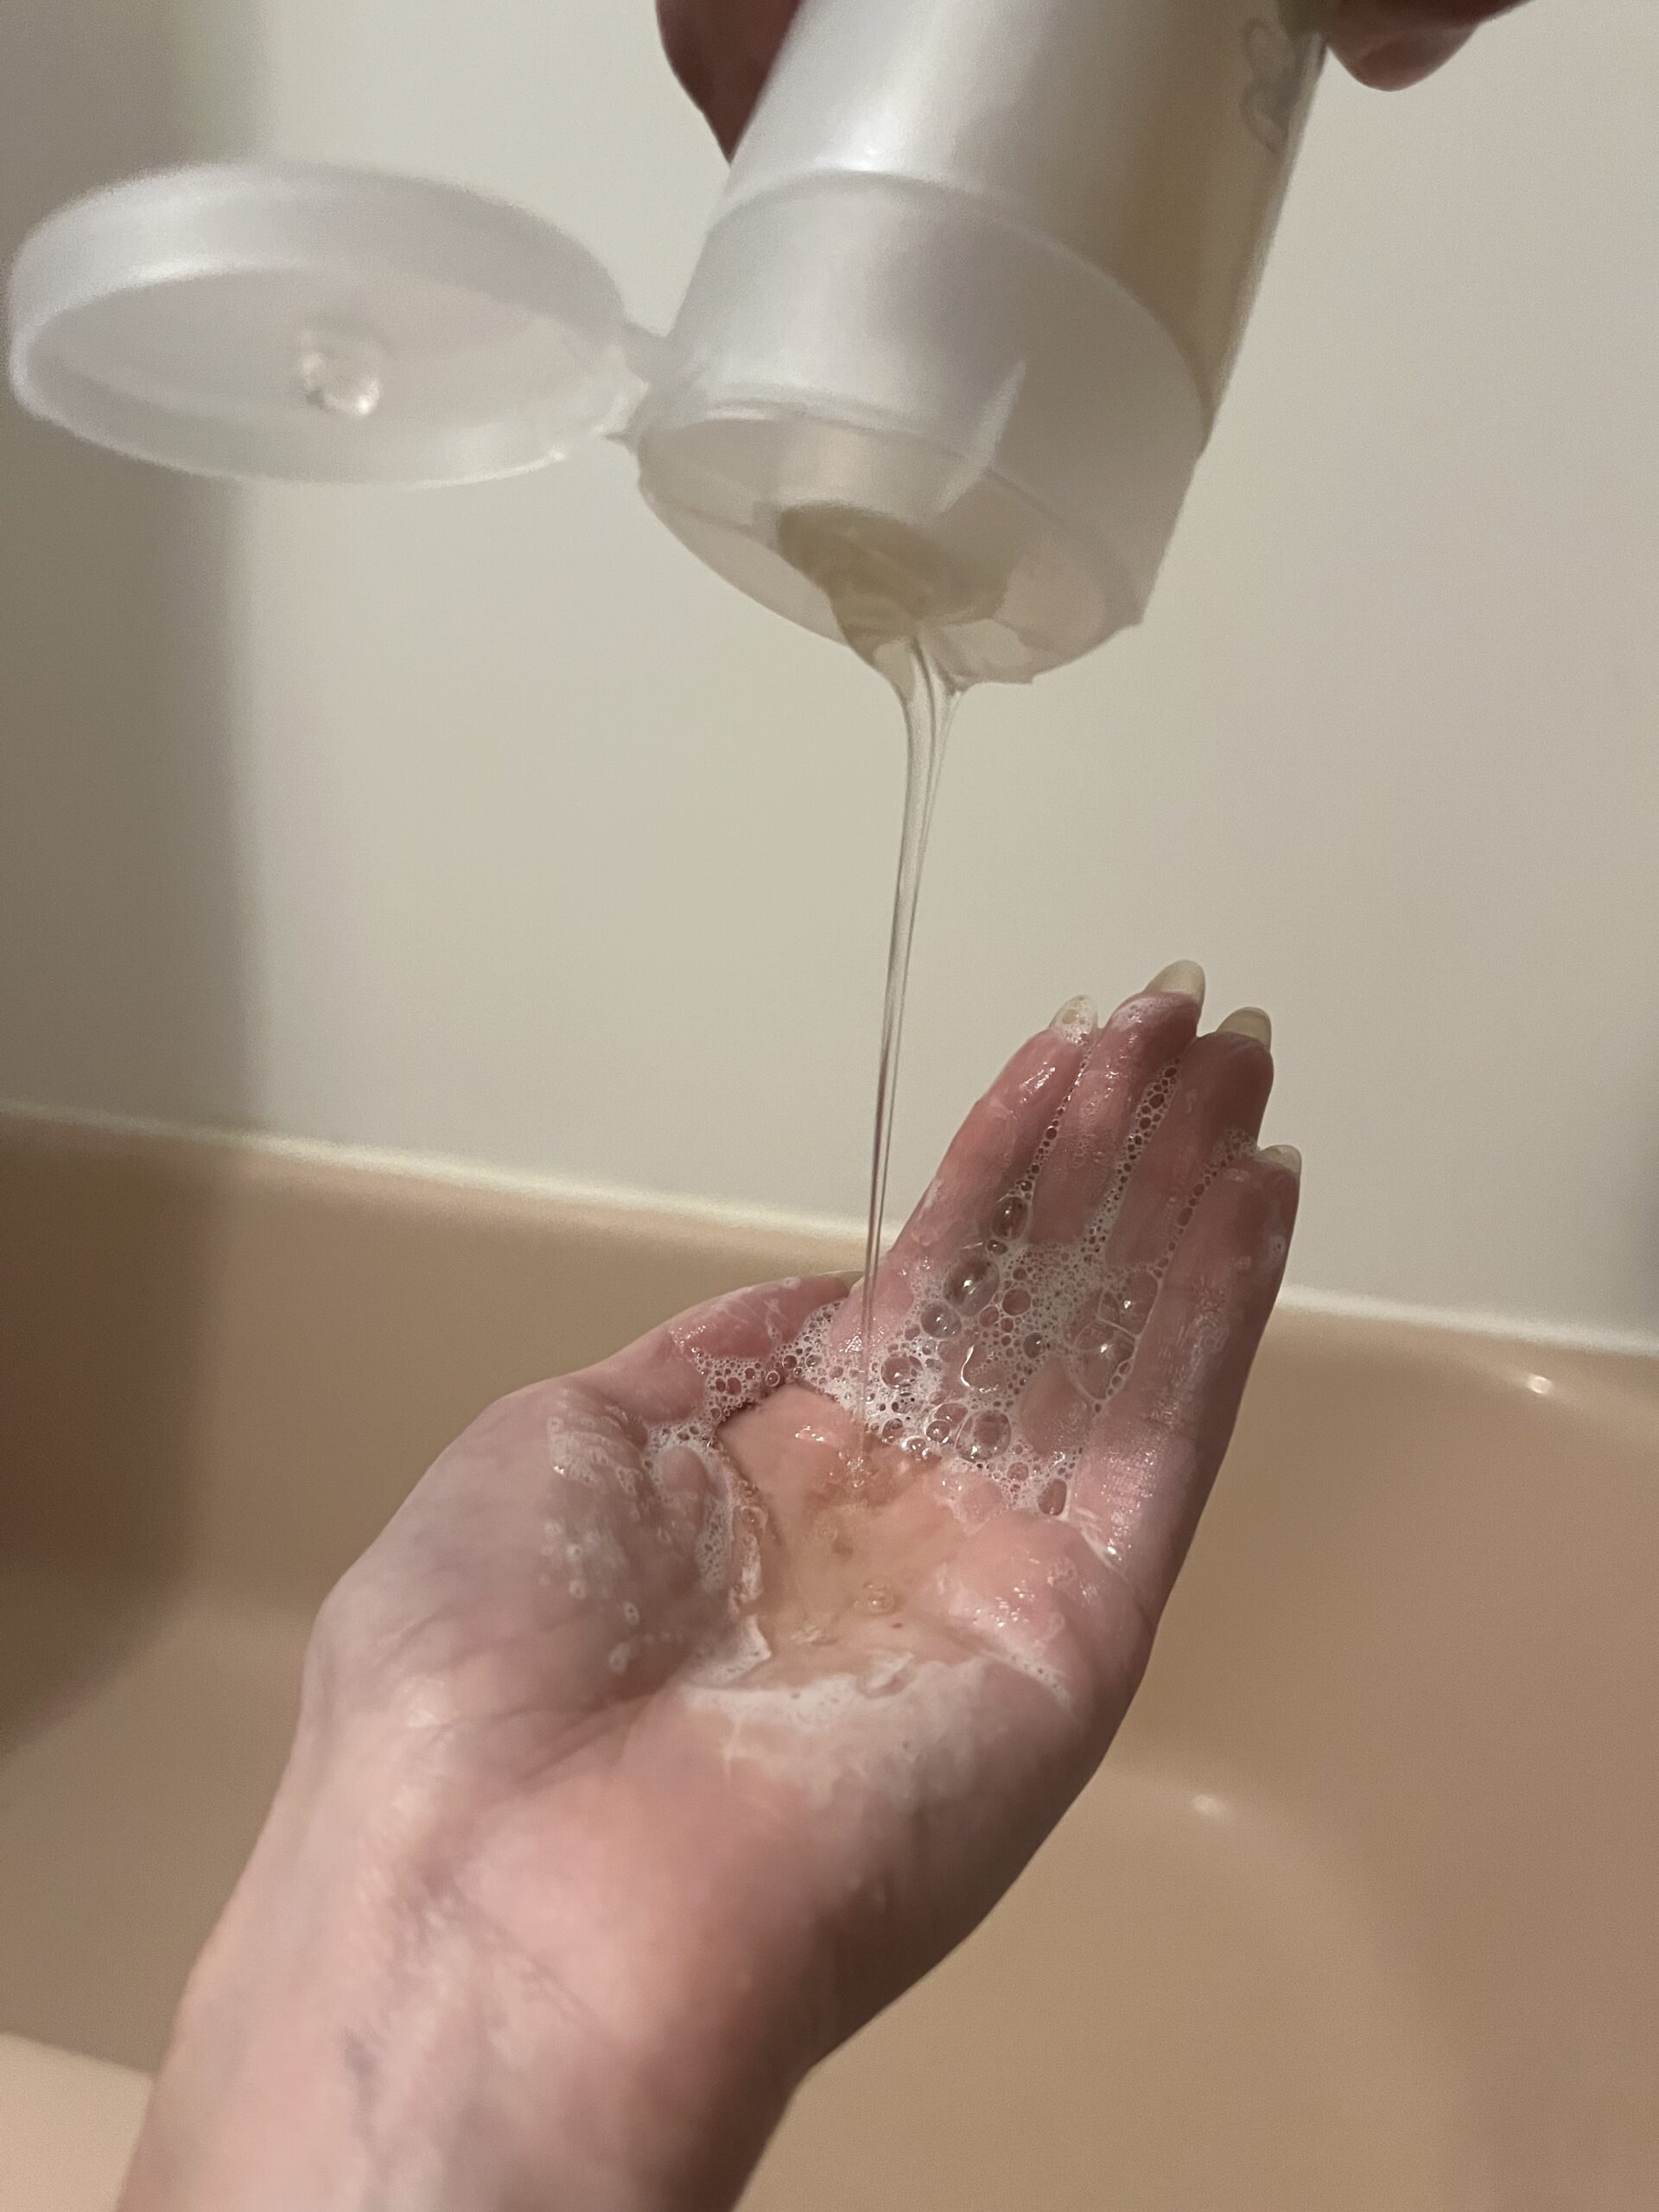 100% Pure shampoo being poured into a hand